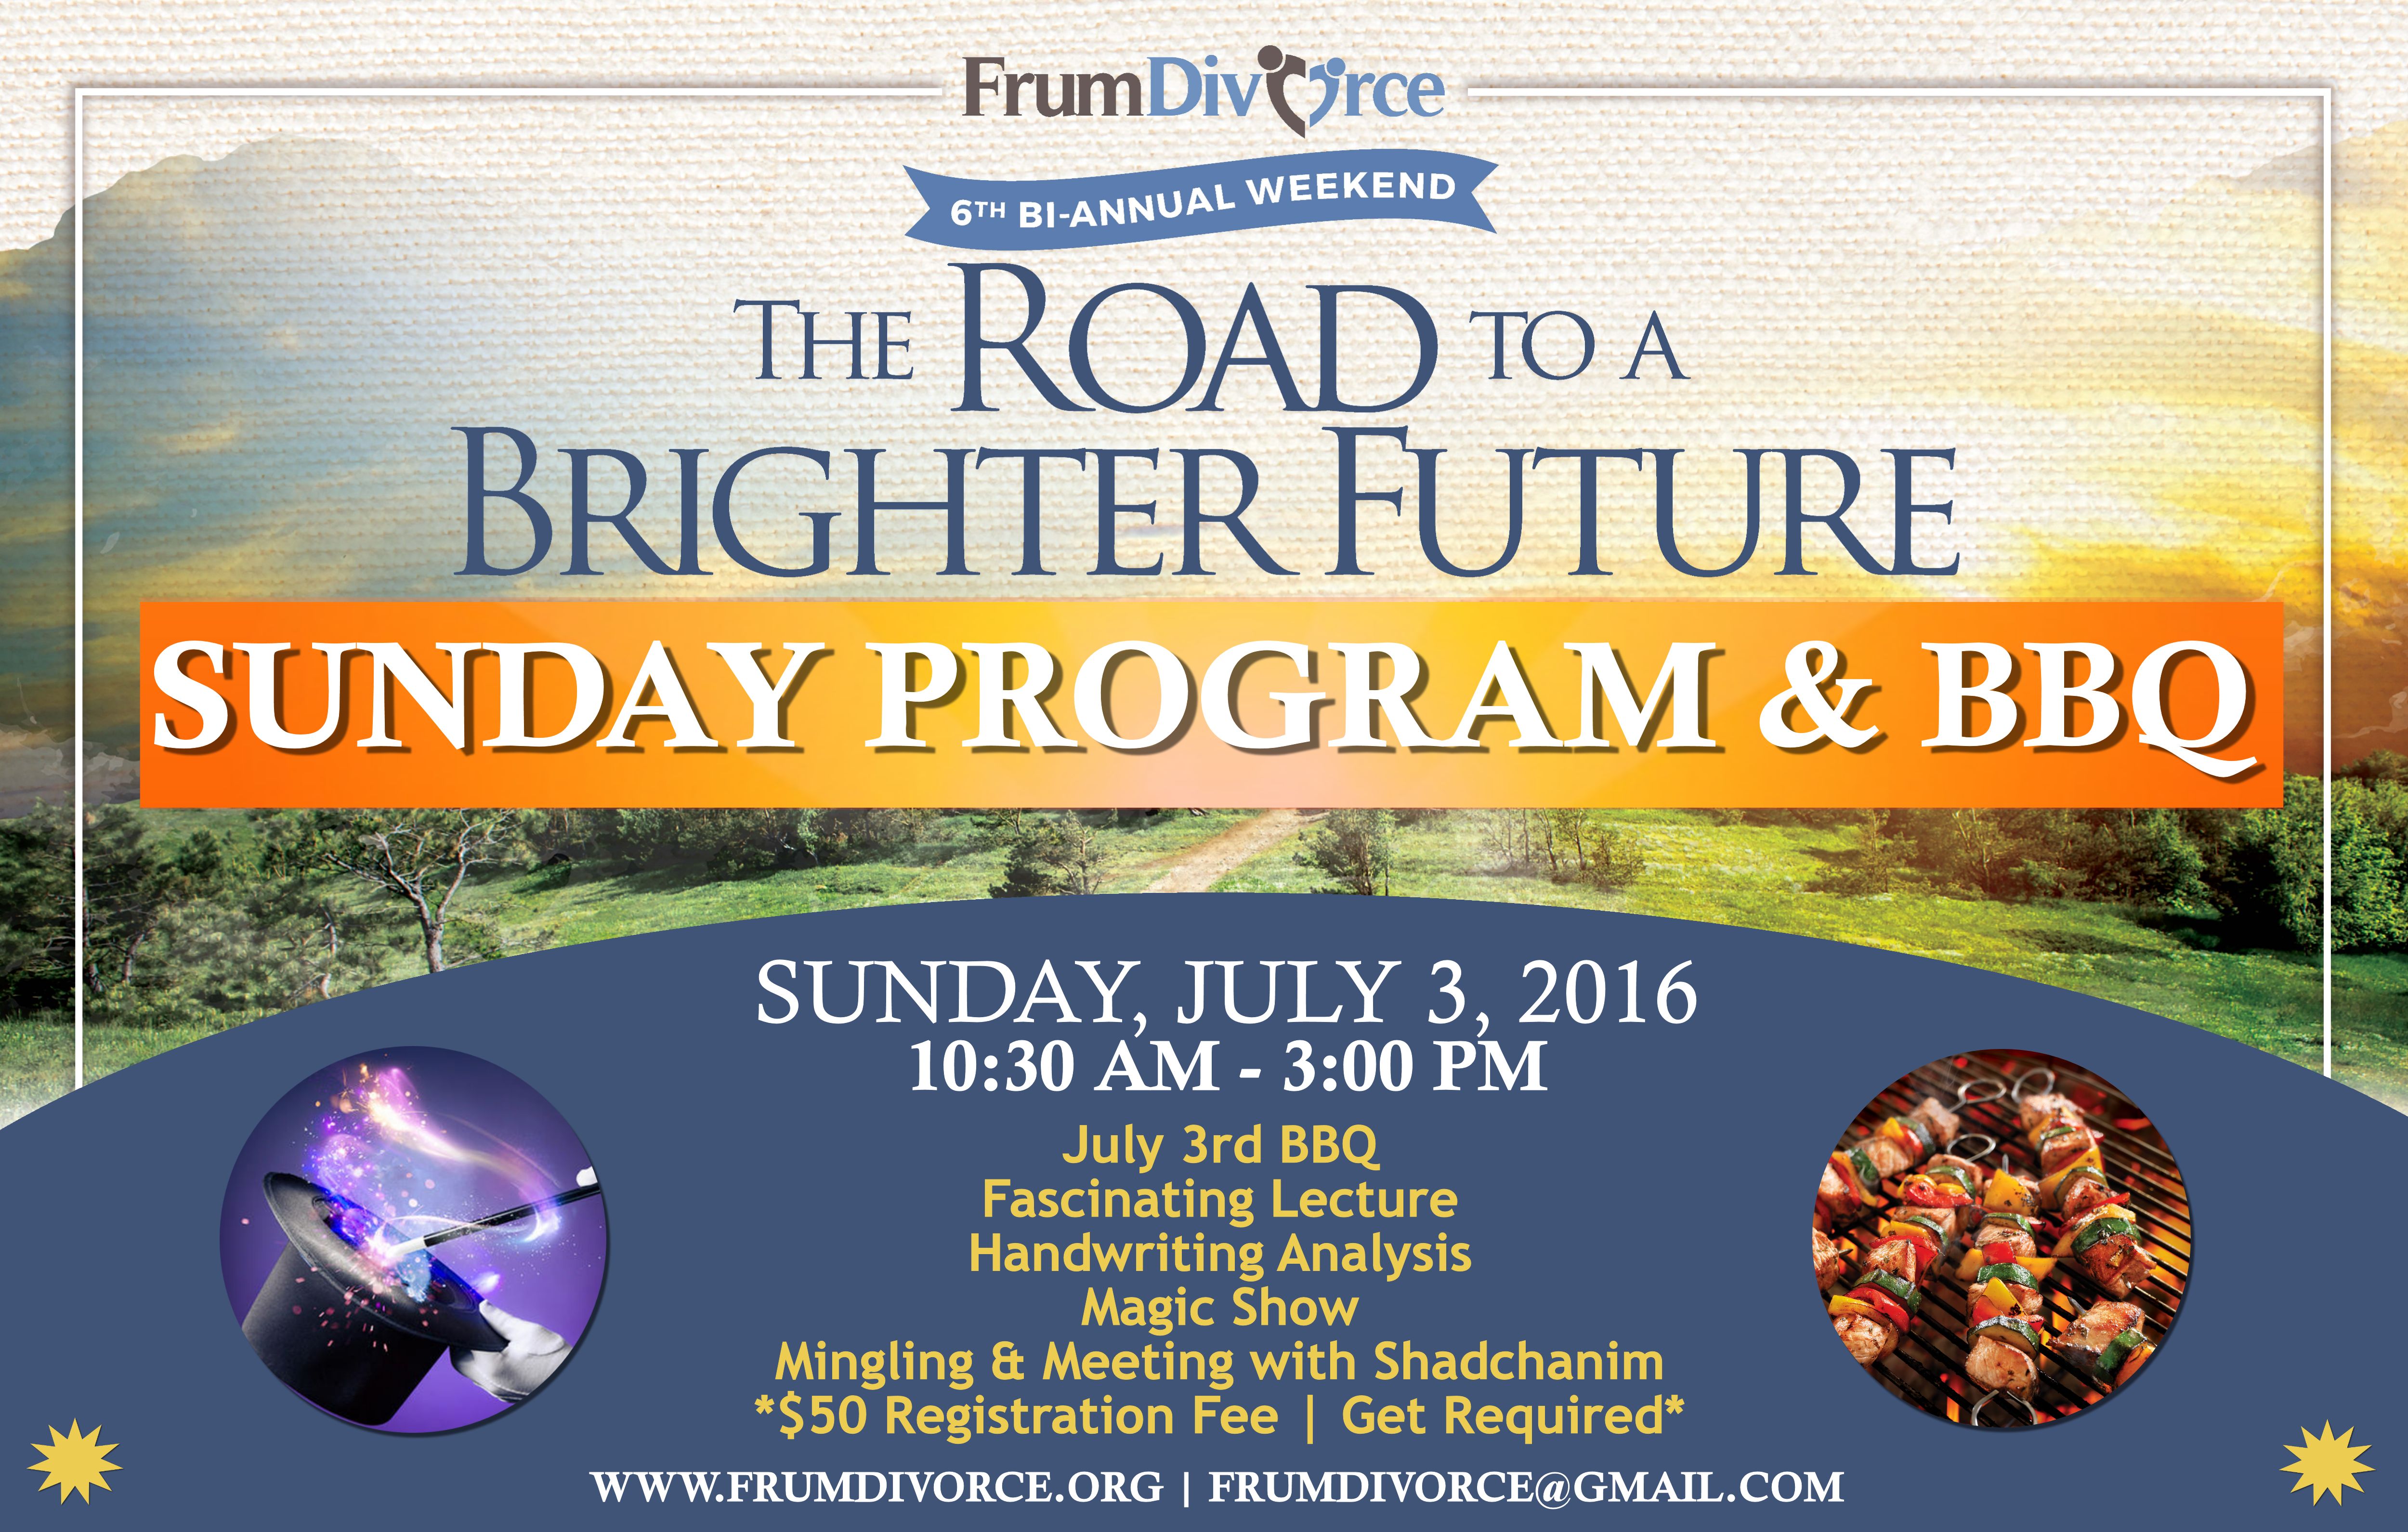 The Road to a Brighter Future: Sunday Program & BBQ